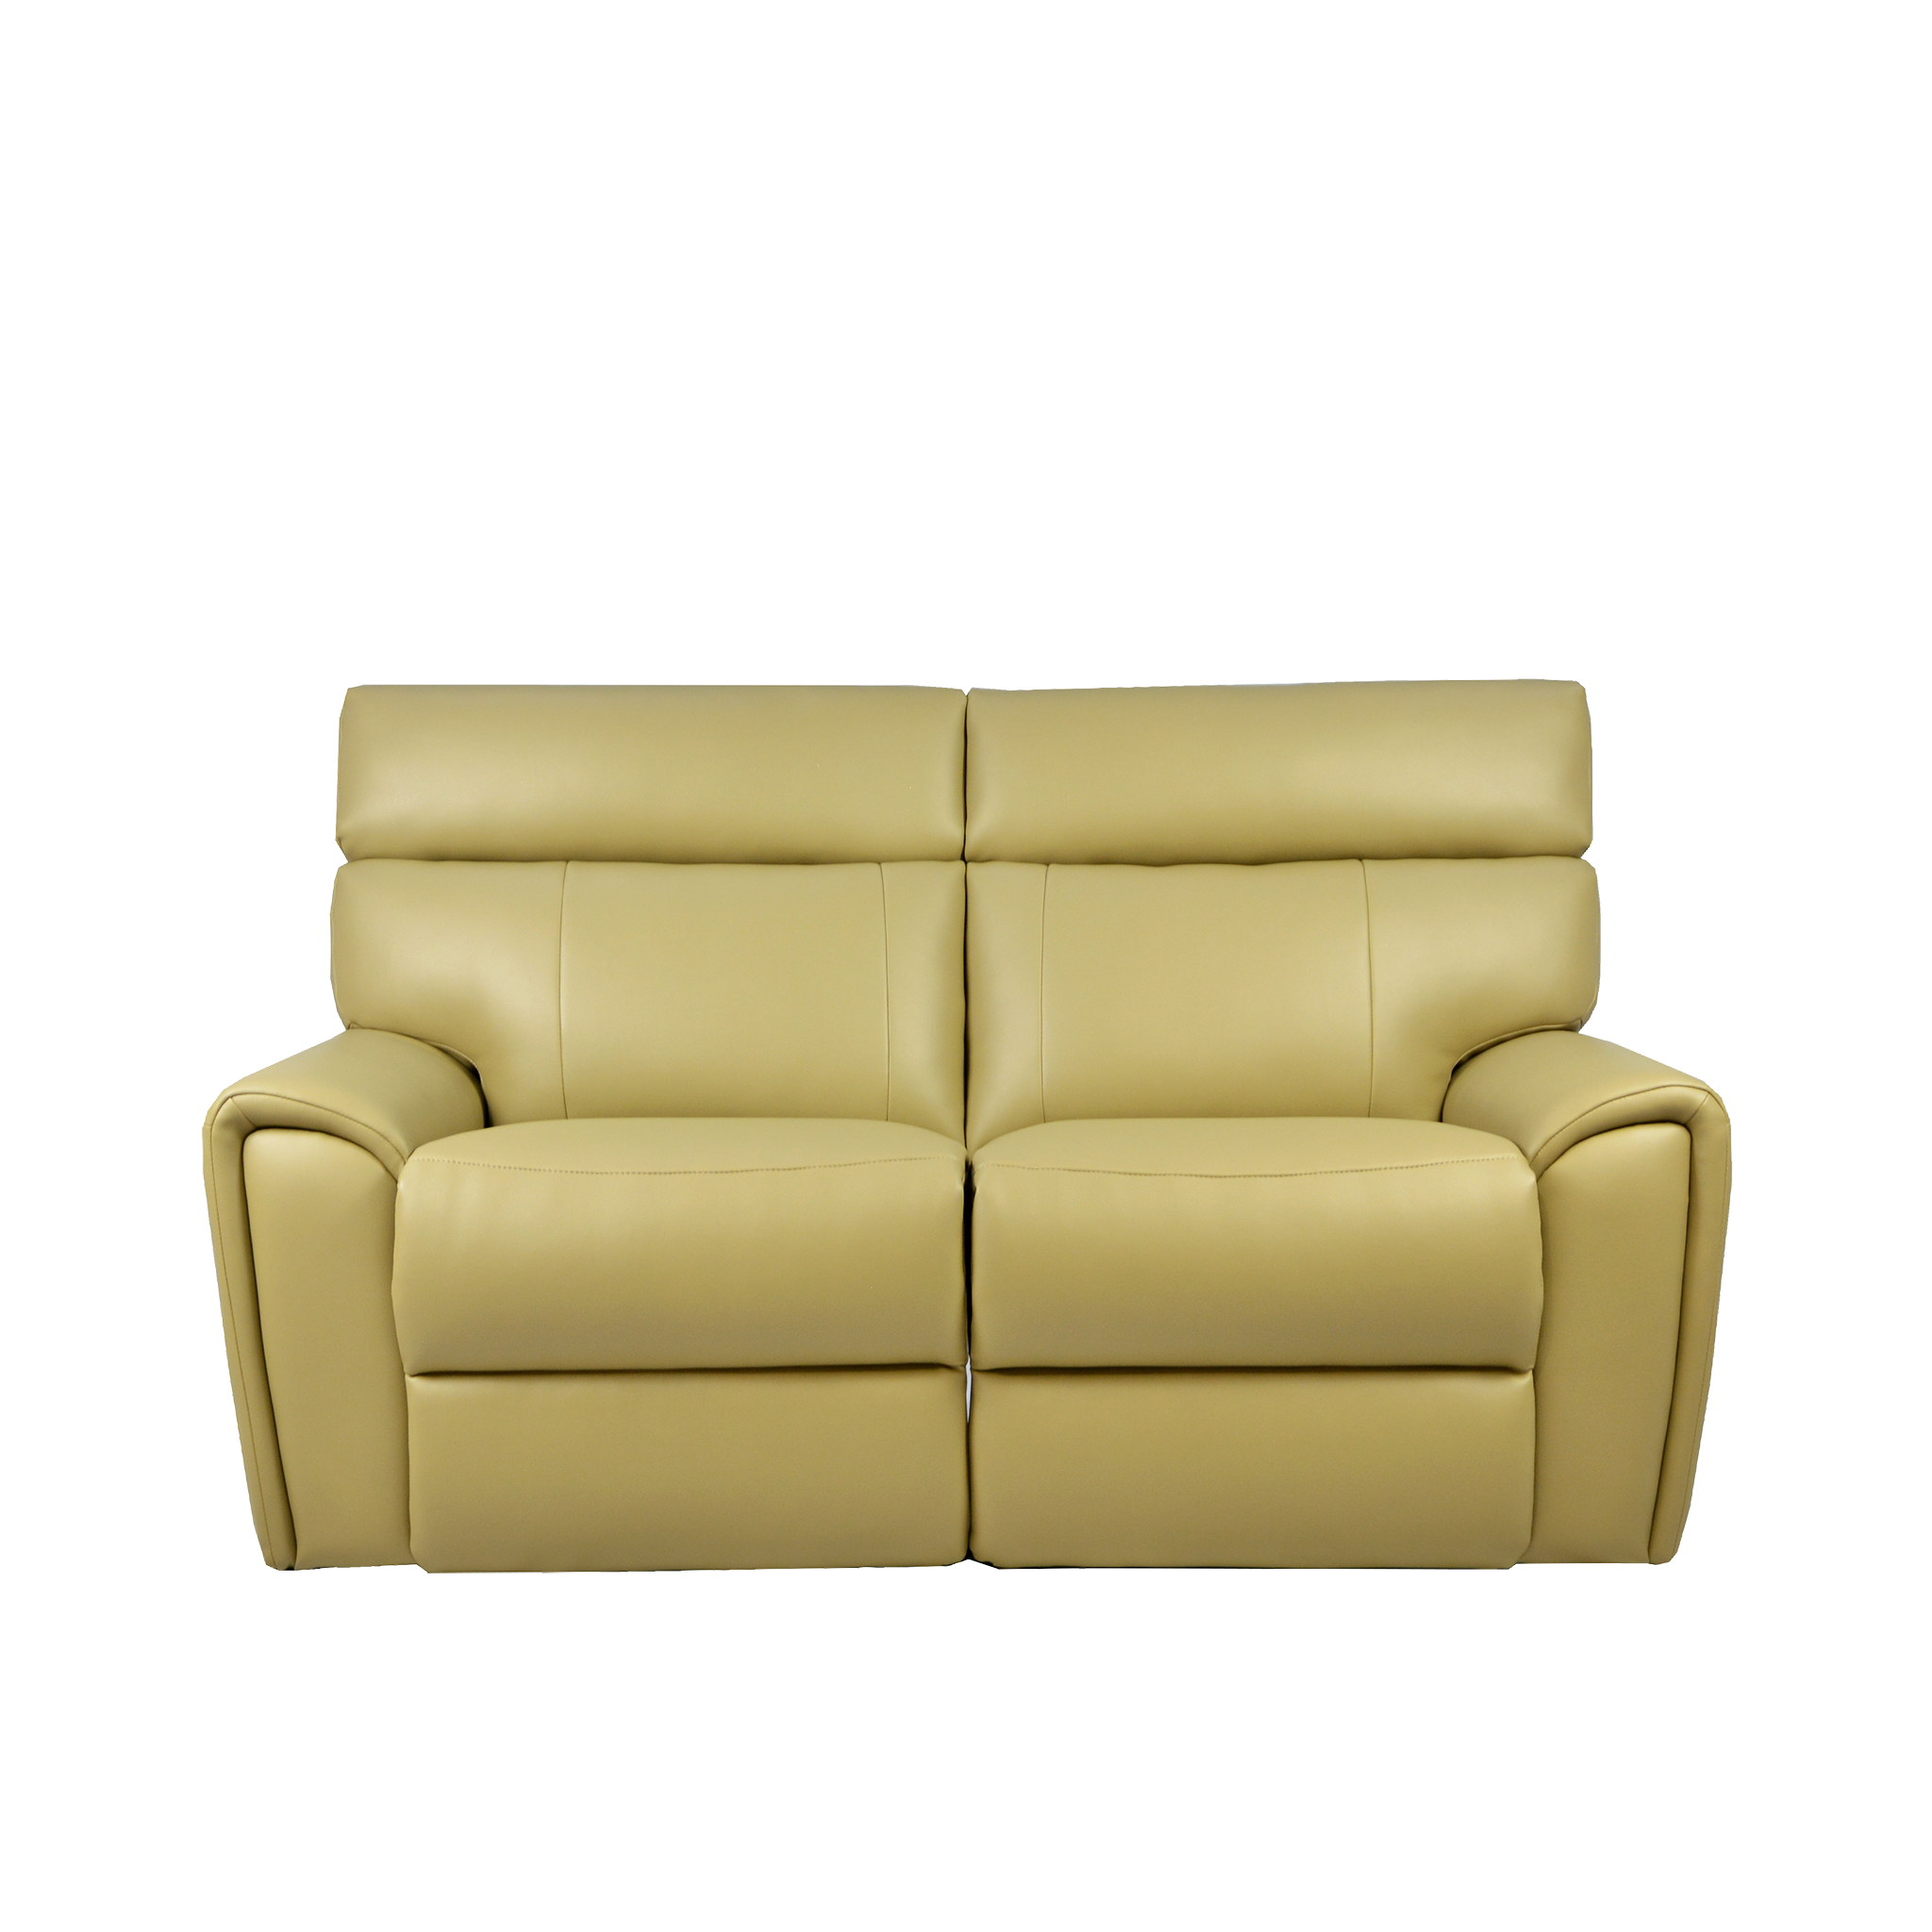 Clyde 2 Seater Electric Recliner Sofa Simulated Leather Novena Furniture Singapore